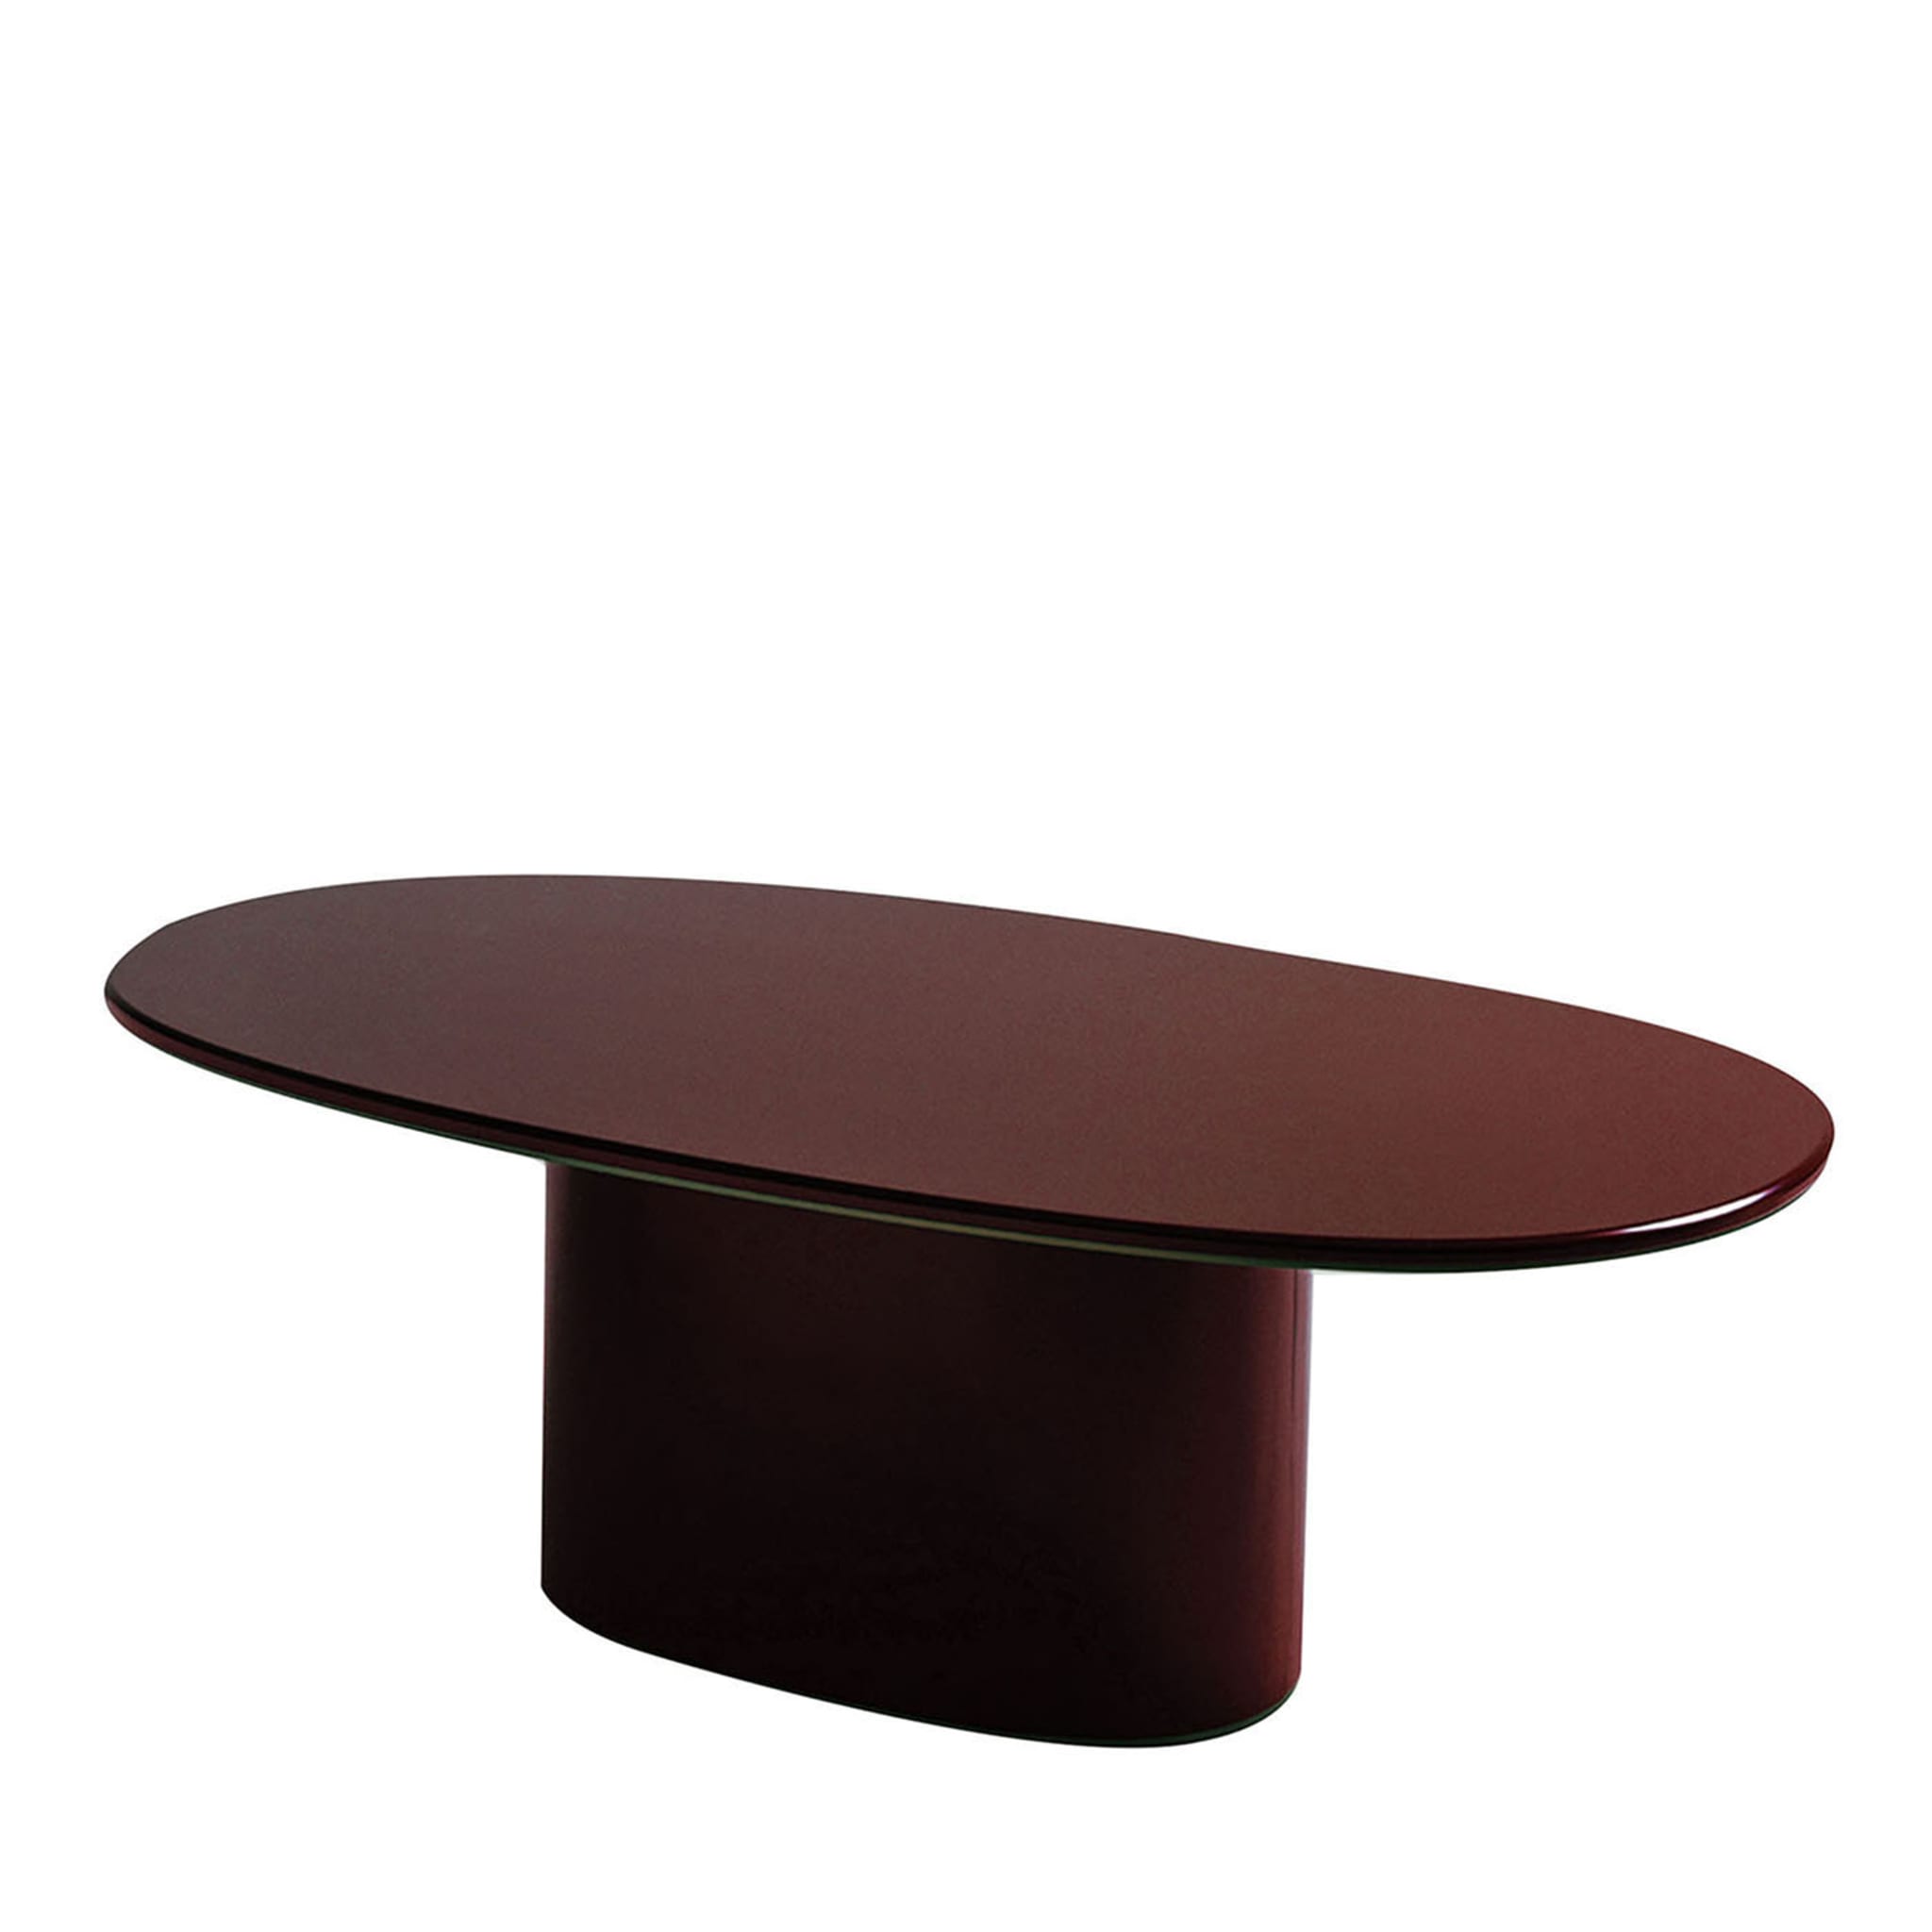 Oku Oval Wine-Red Dining Table by Federica Biasi - Main view